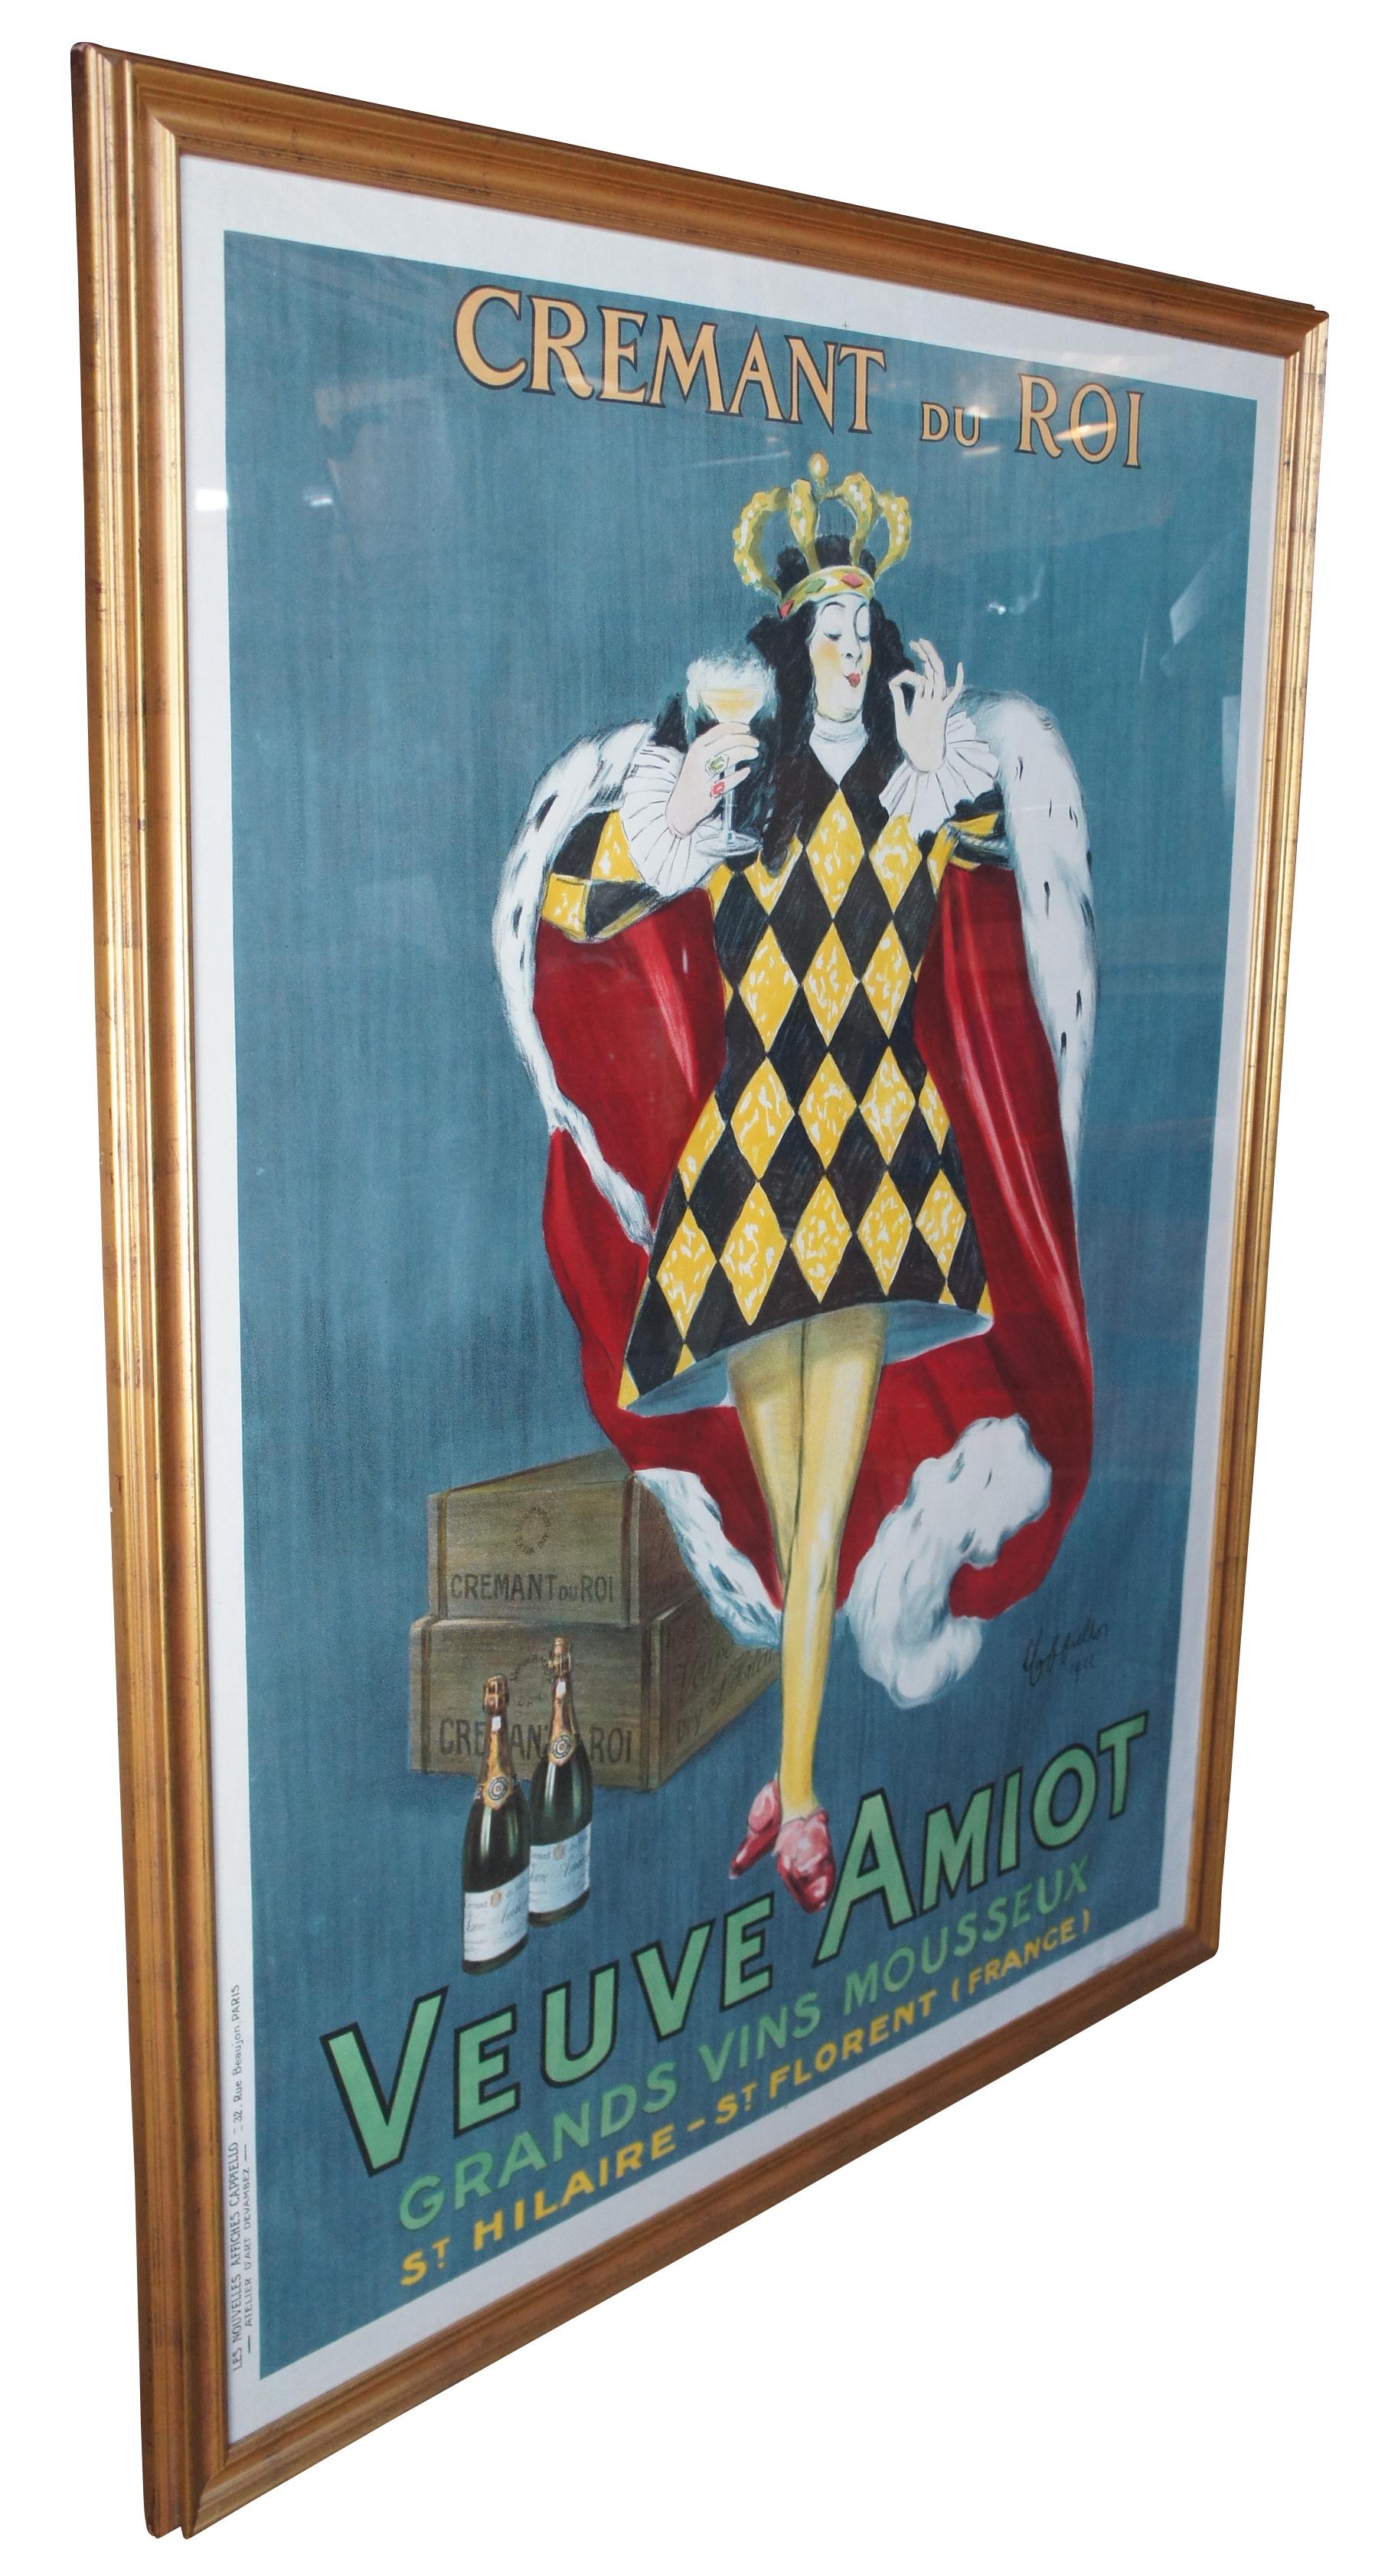 Cremant Du Roi French sparkling wine poster by Cappiello Leonetto circa 1922 Crémant du Roi, Veuve Amiot, grands vins mousseux Veuve Amiot, showing the King Louis XIV's brother tasting a cup of this delicious French Champagne. A famous Cappiello